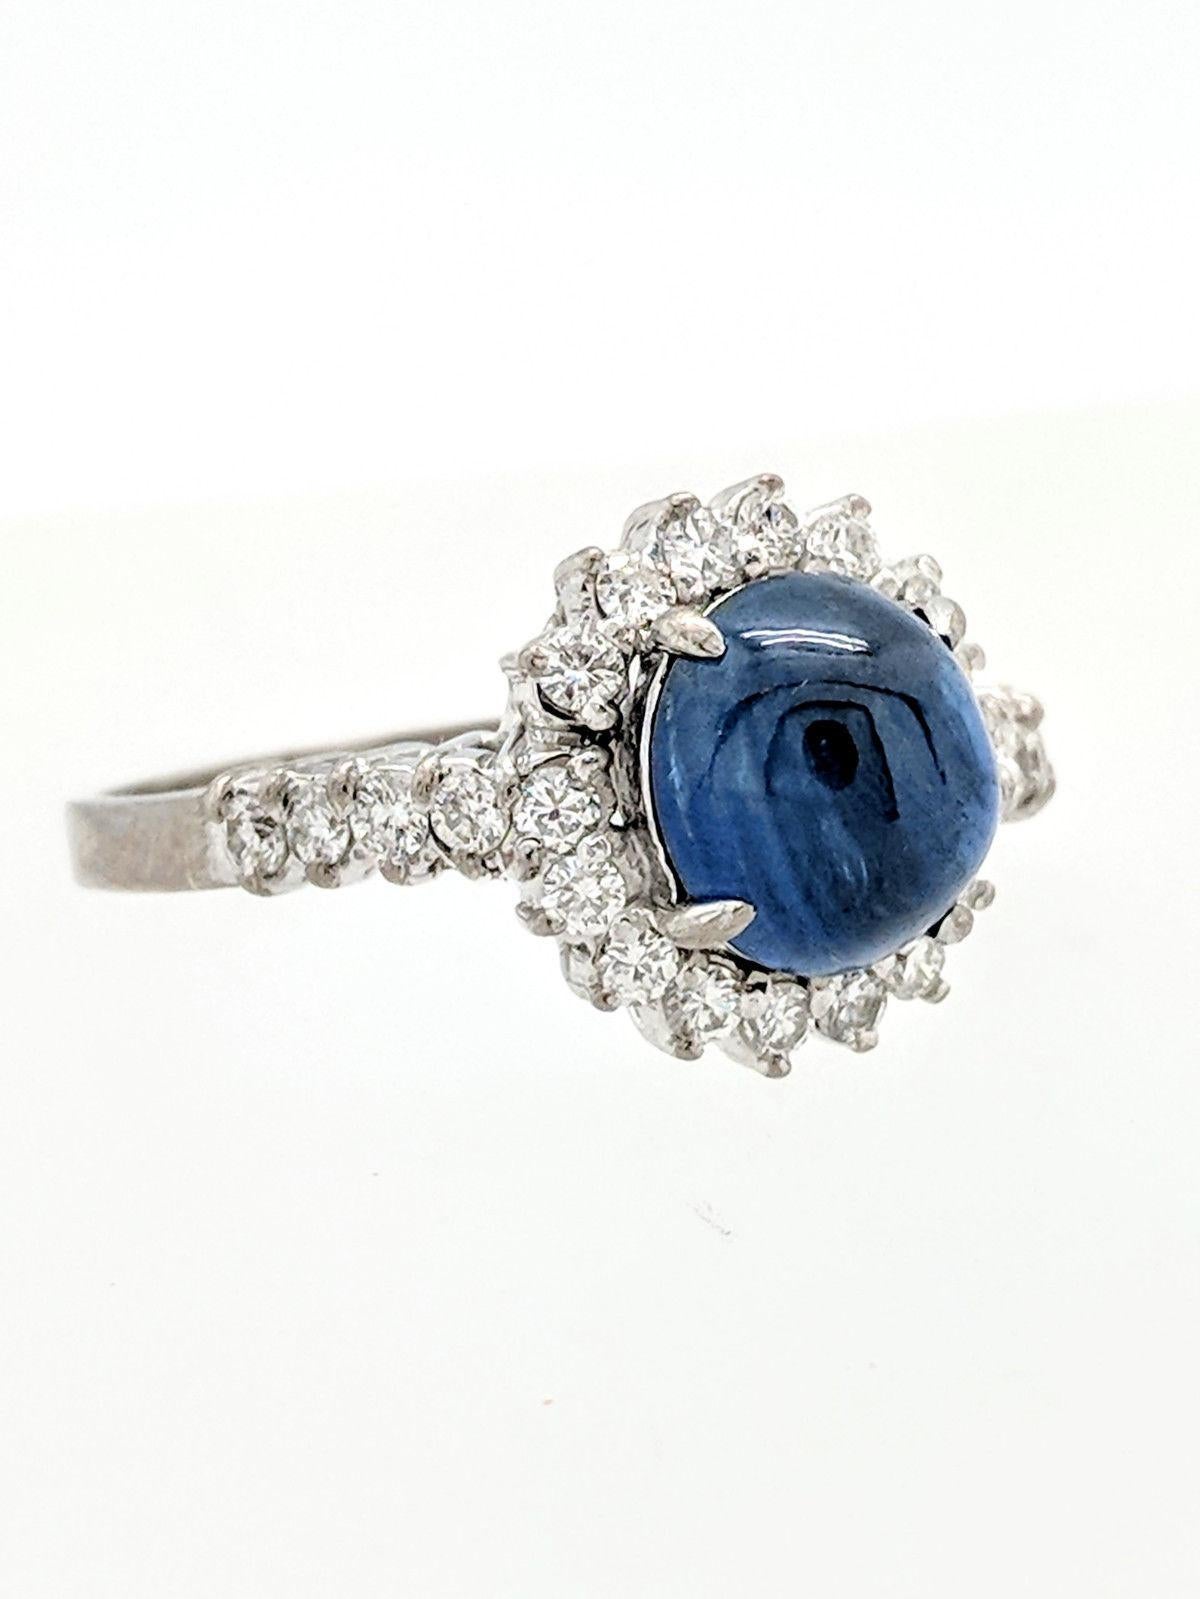 You are viewing a beautiful Estate Blue Star Sapphire and Diamond Halo Ring. Any woman would love to add this piece to their collection! 

This ring is crafted from 14k white gold and weighs 4.4 grams. It features one (1) 8x7mm natural oval shaped